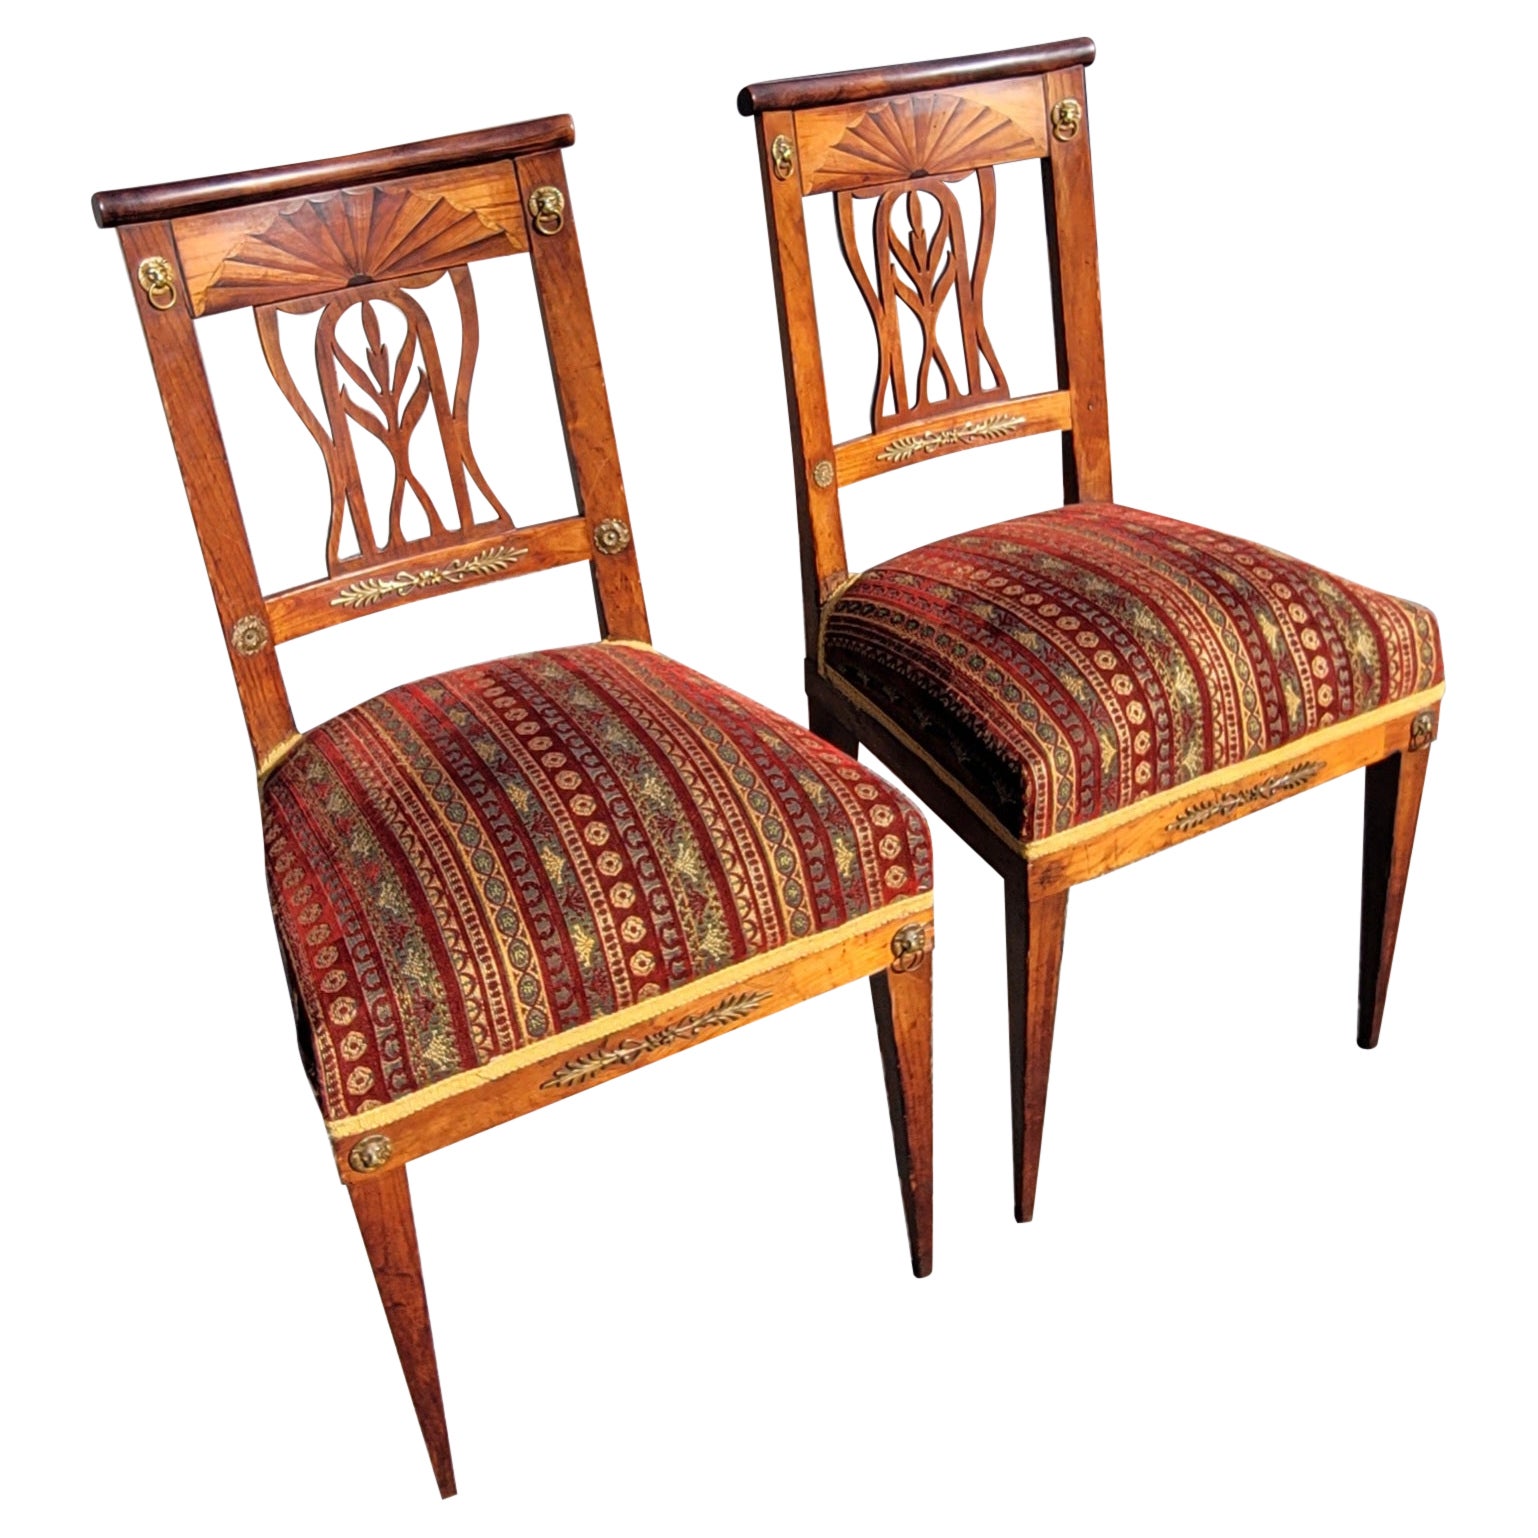 19th C. Swedish Continental Brass Mounted & Parquetry Inlaid Cherry Chairs, Pair For Sale